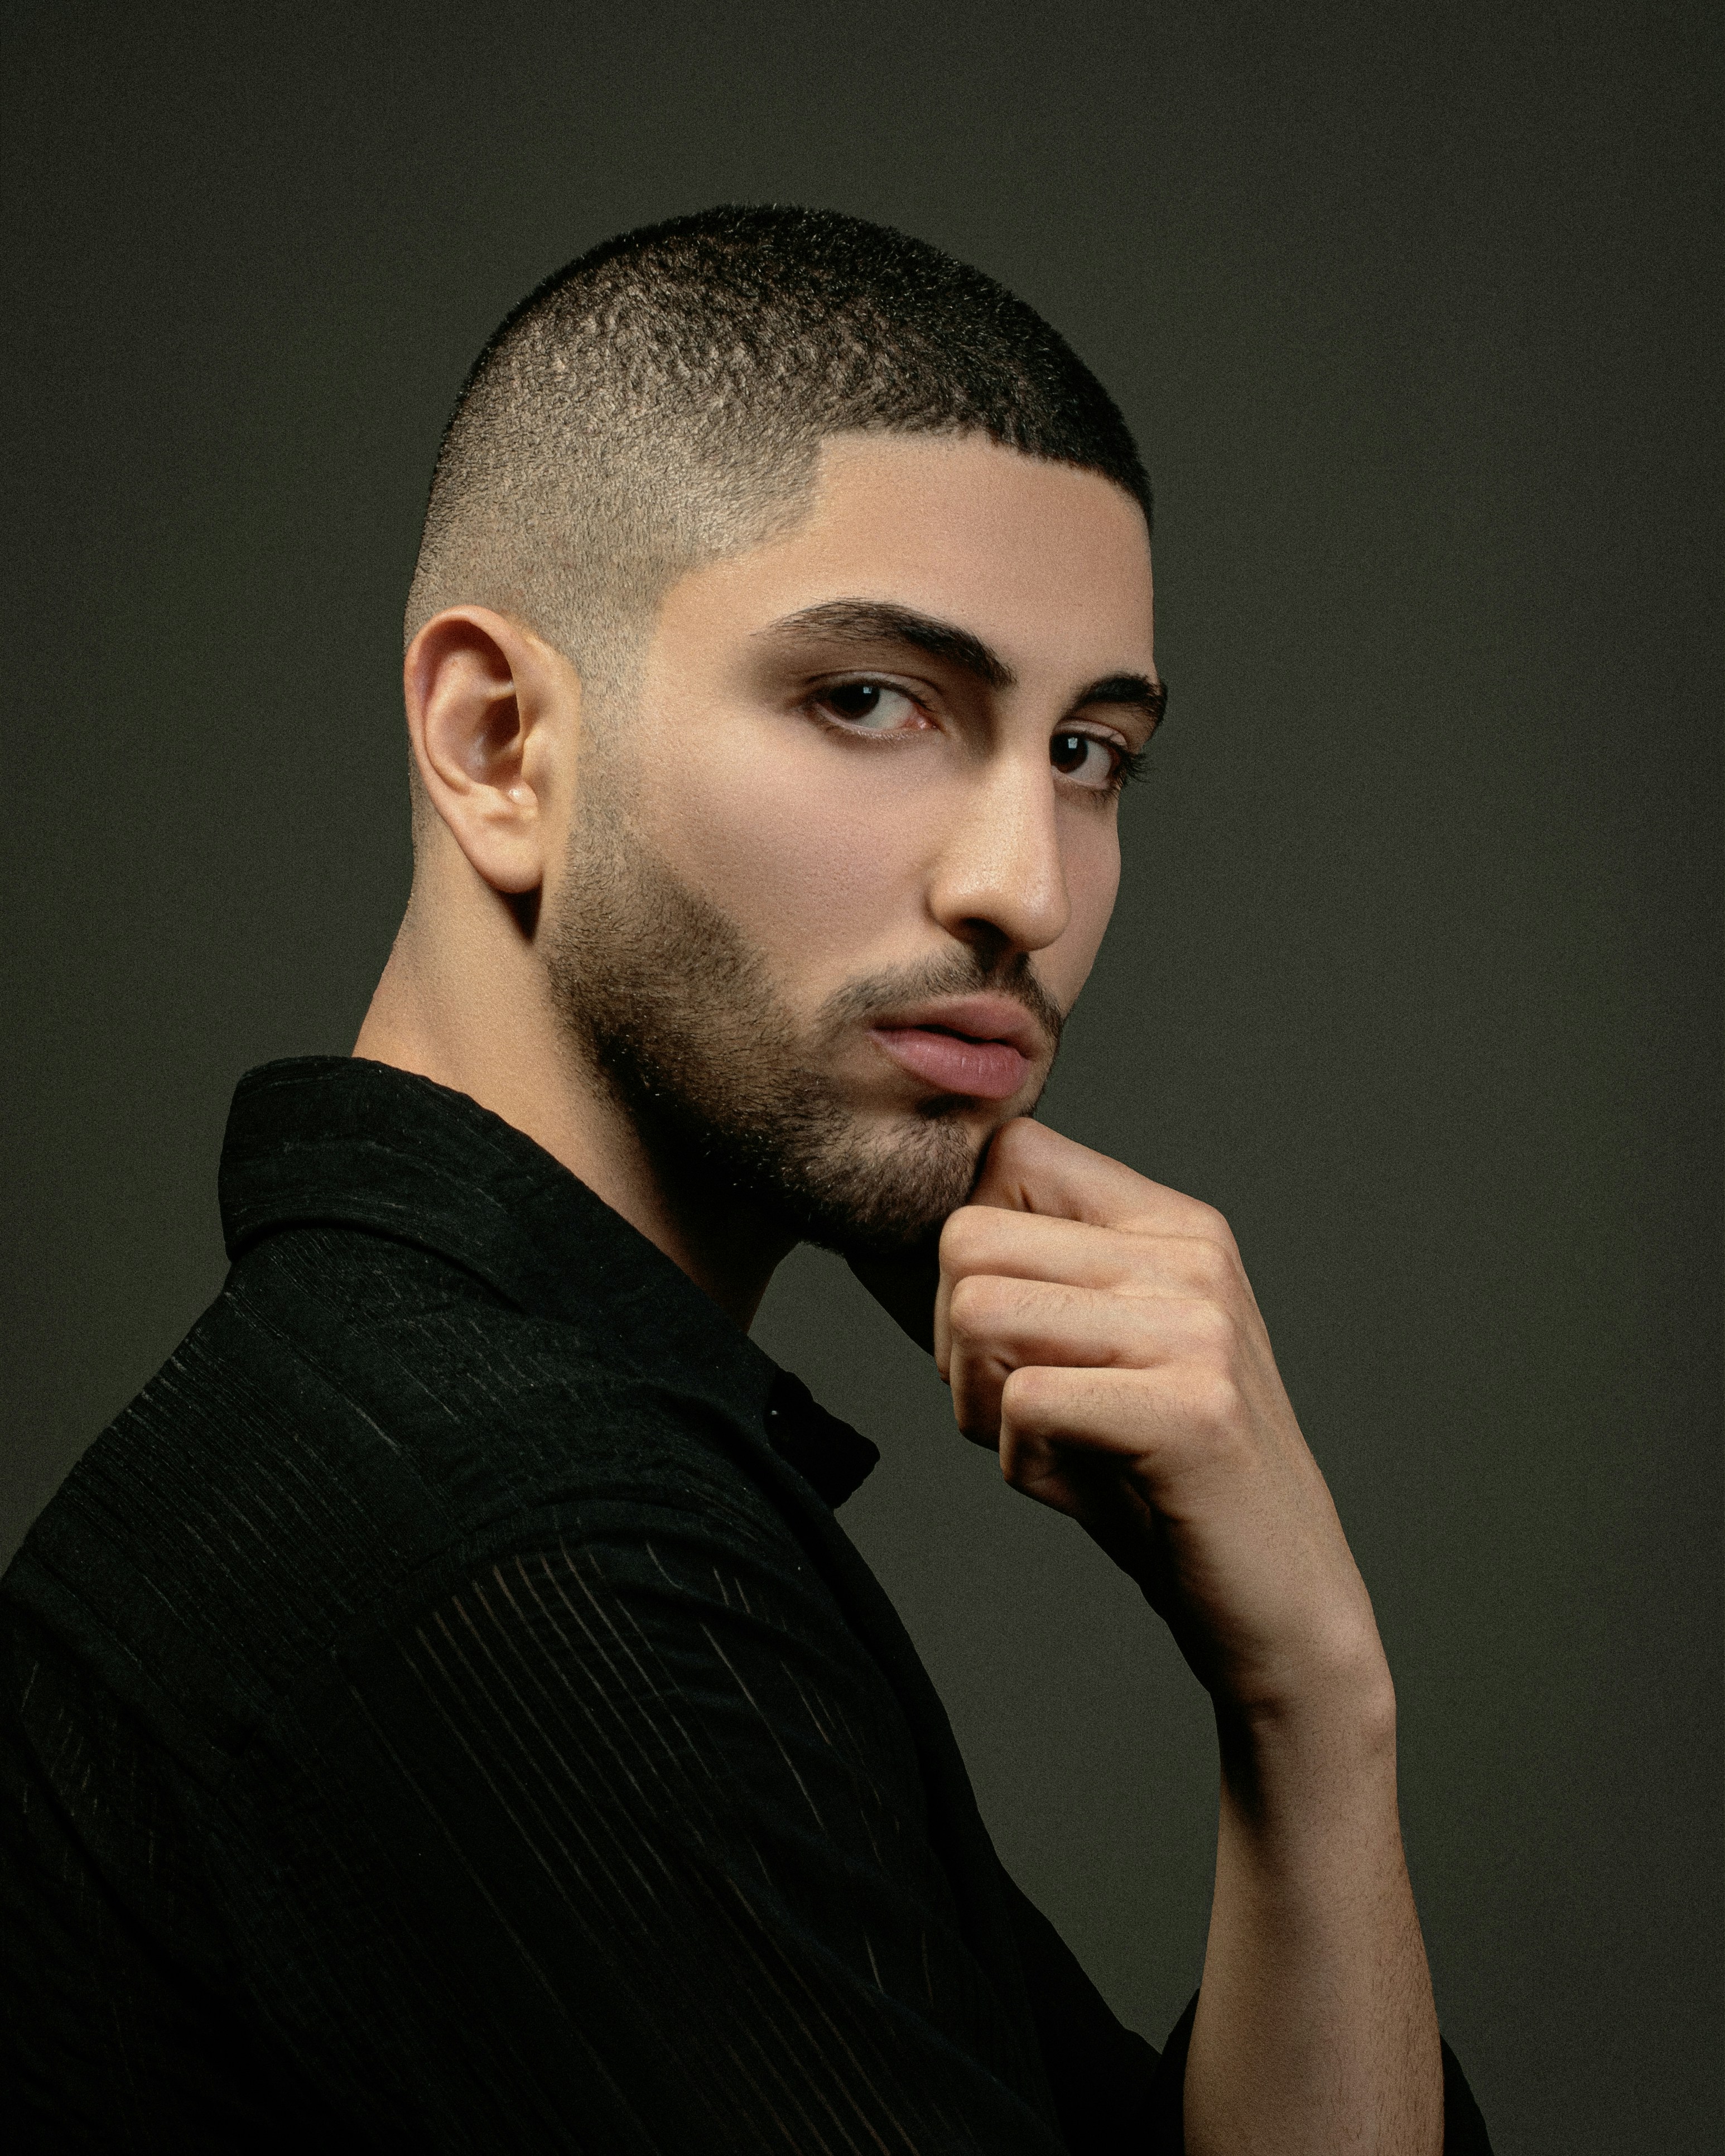 great photo recipe,how to photograph instagram ax.behrooz; a man with a shaved head and a black shirt